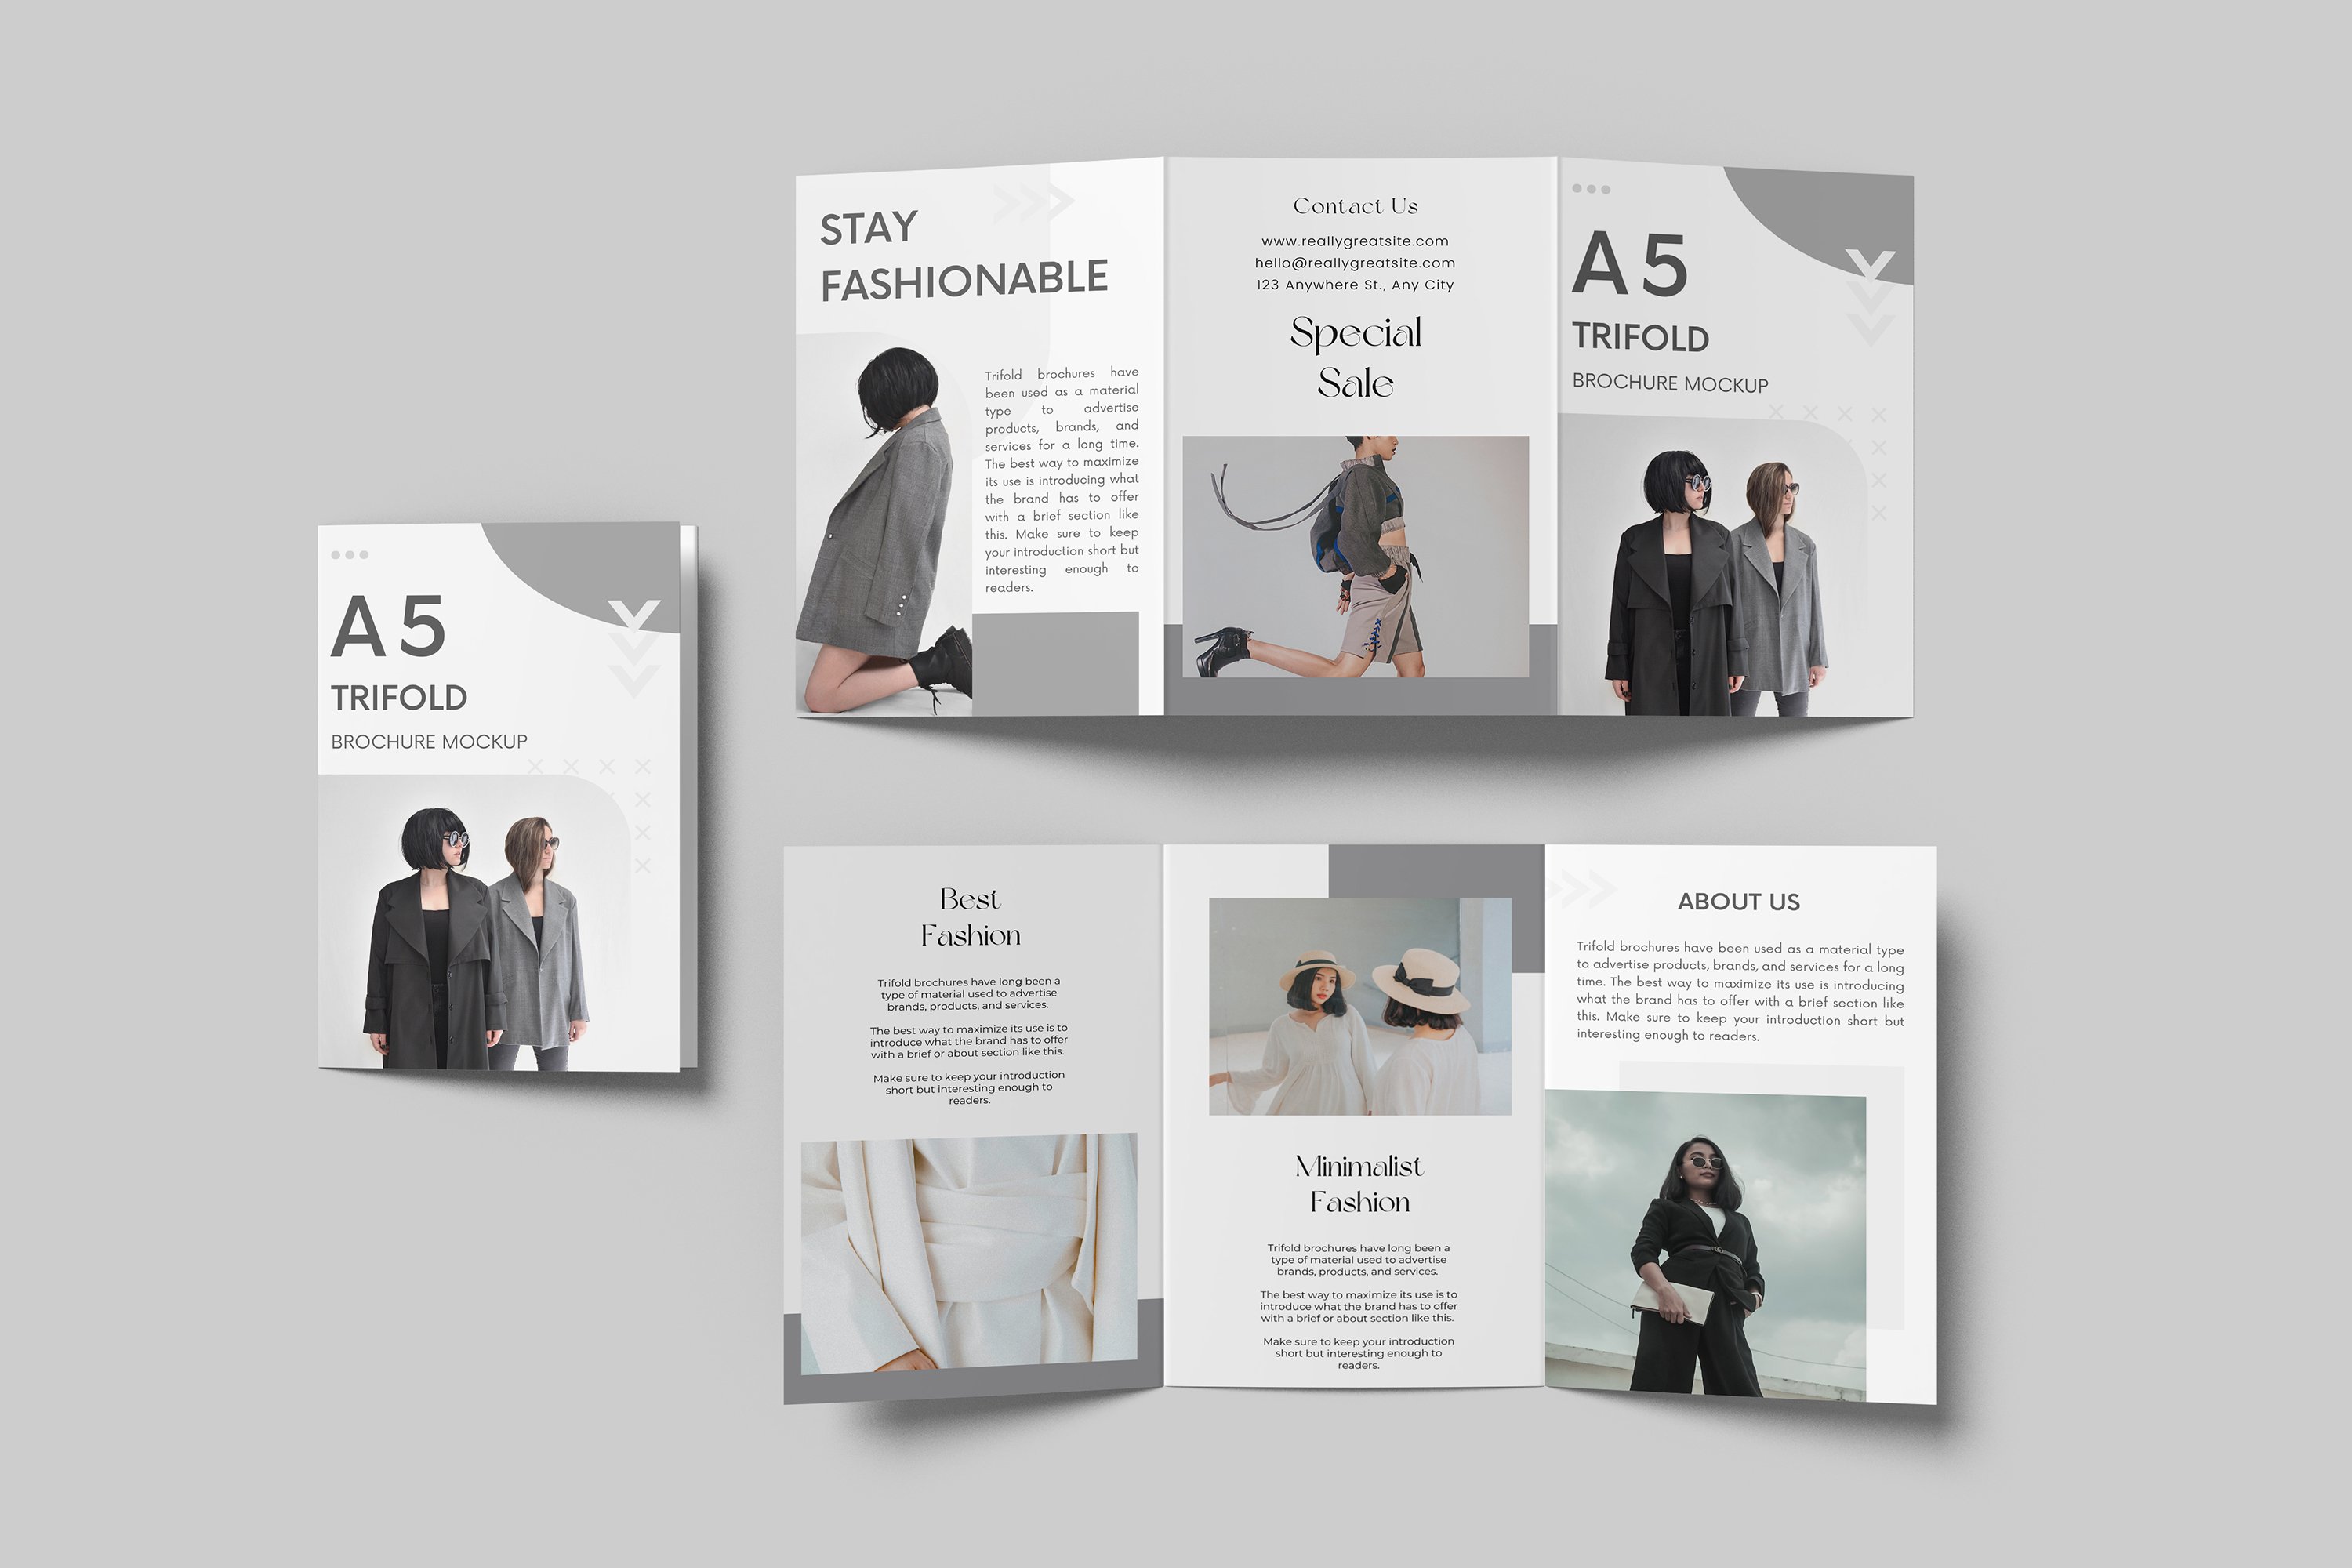 A5 Trifold Brochure Mockup preview image.